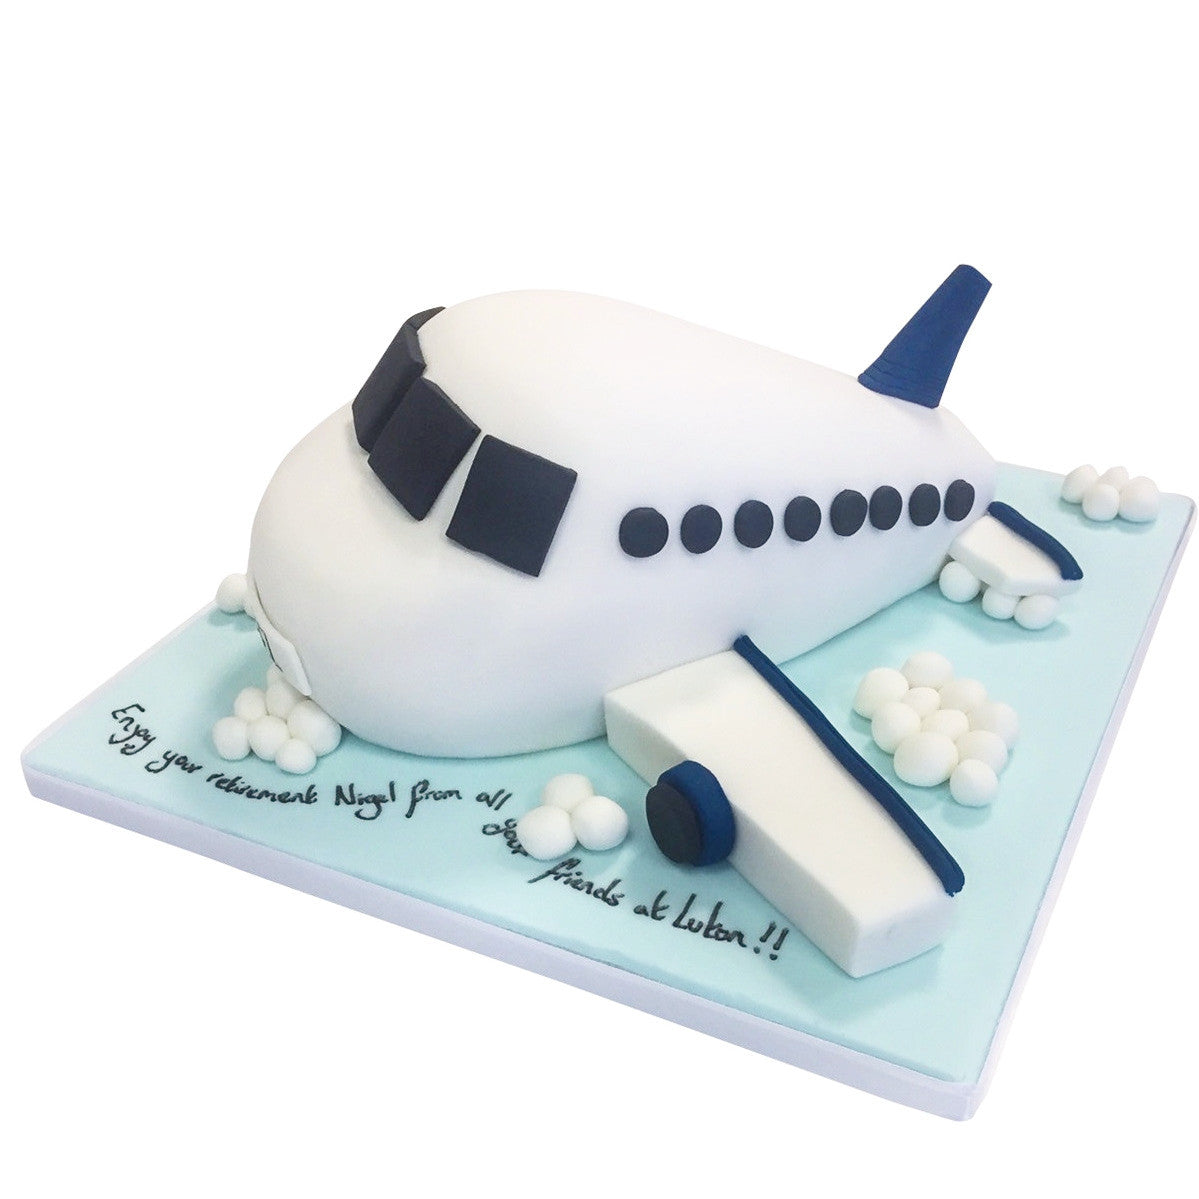 Aeroplanes and Spaceships Cakes- Boys